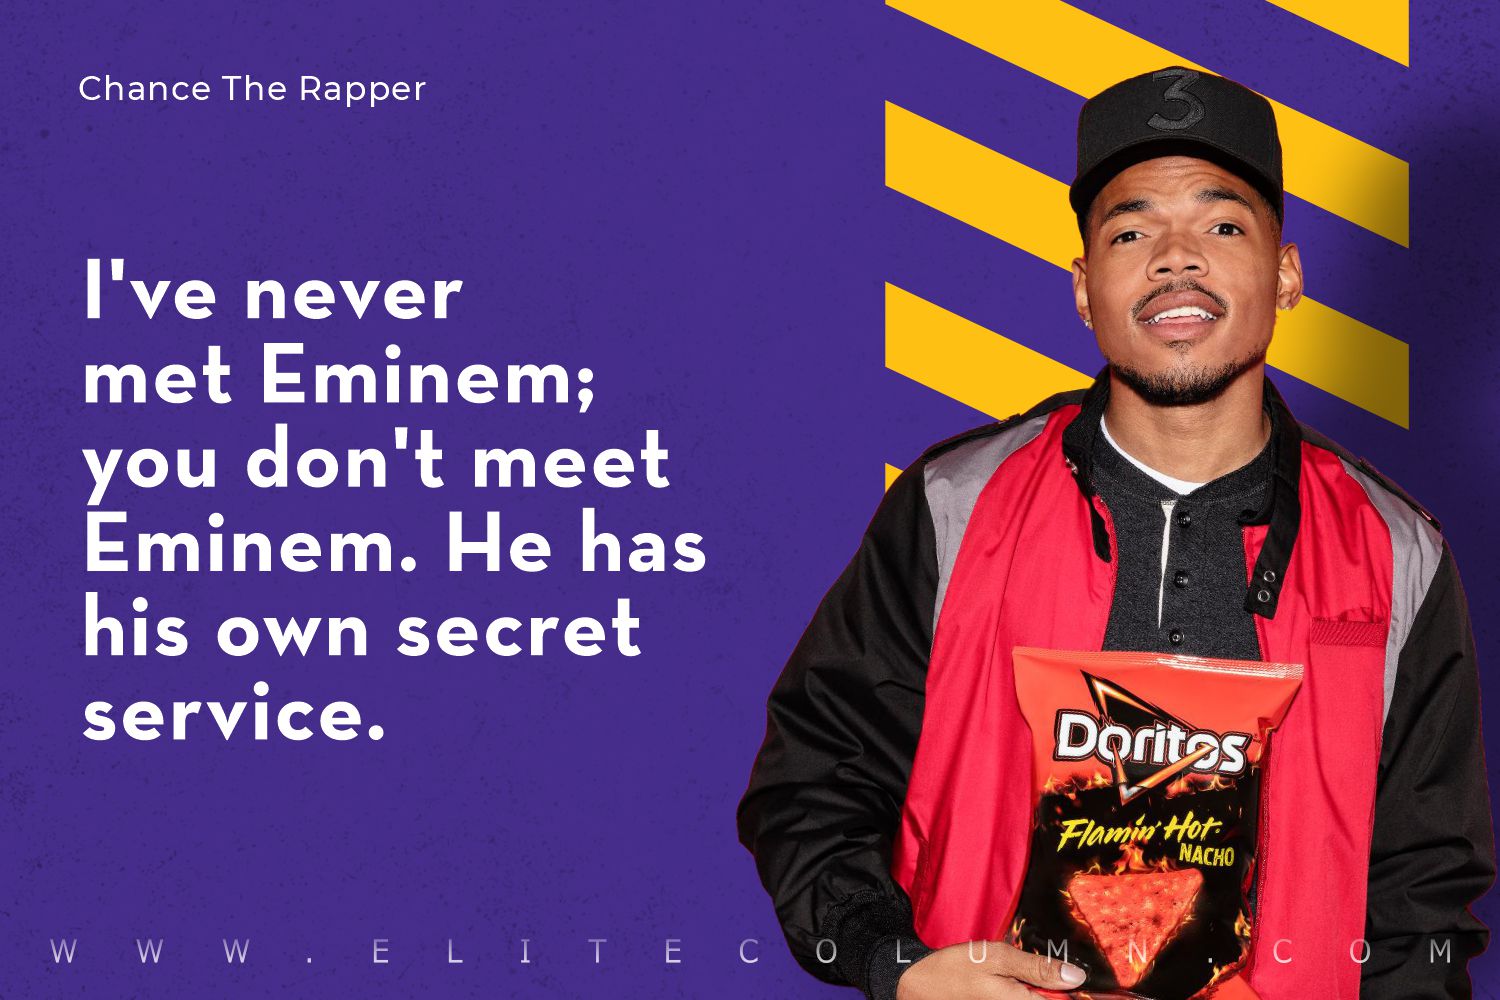 7 Chance The Rapper Quotes About Life